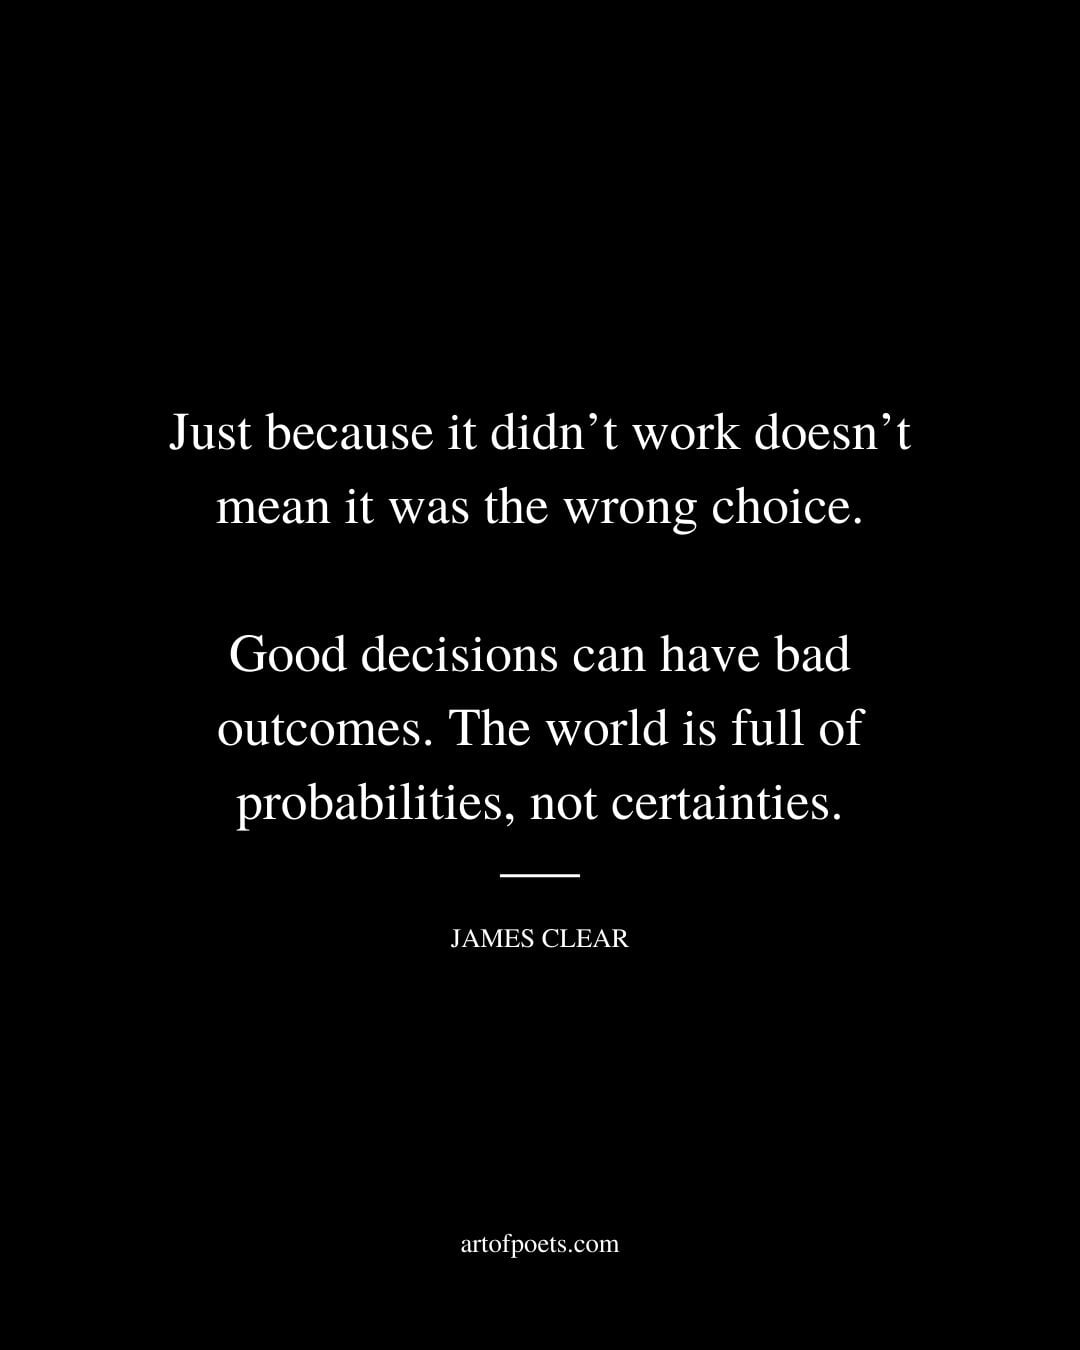 Just because it didnt work doesnt mean it was the wrong choice. Good decisions can have bad outcomes. The world is full of probabilities not certainties